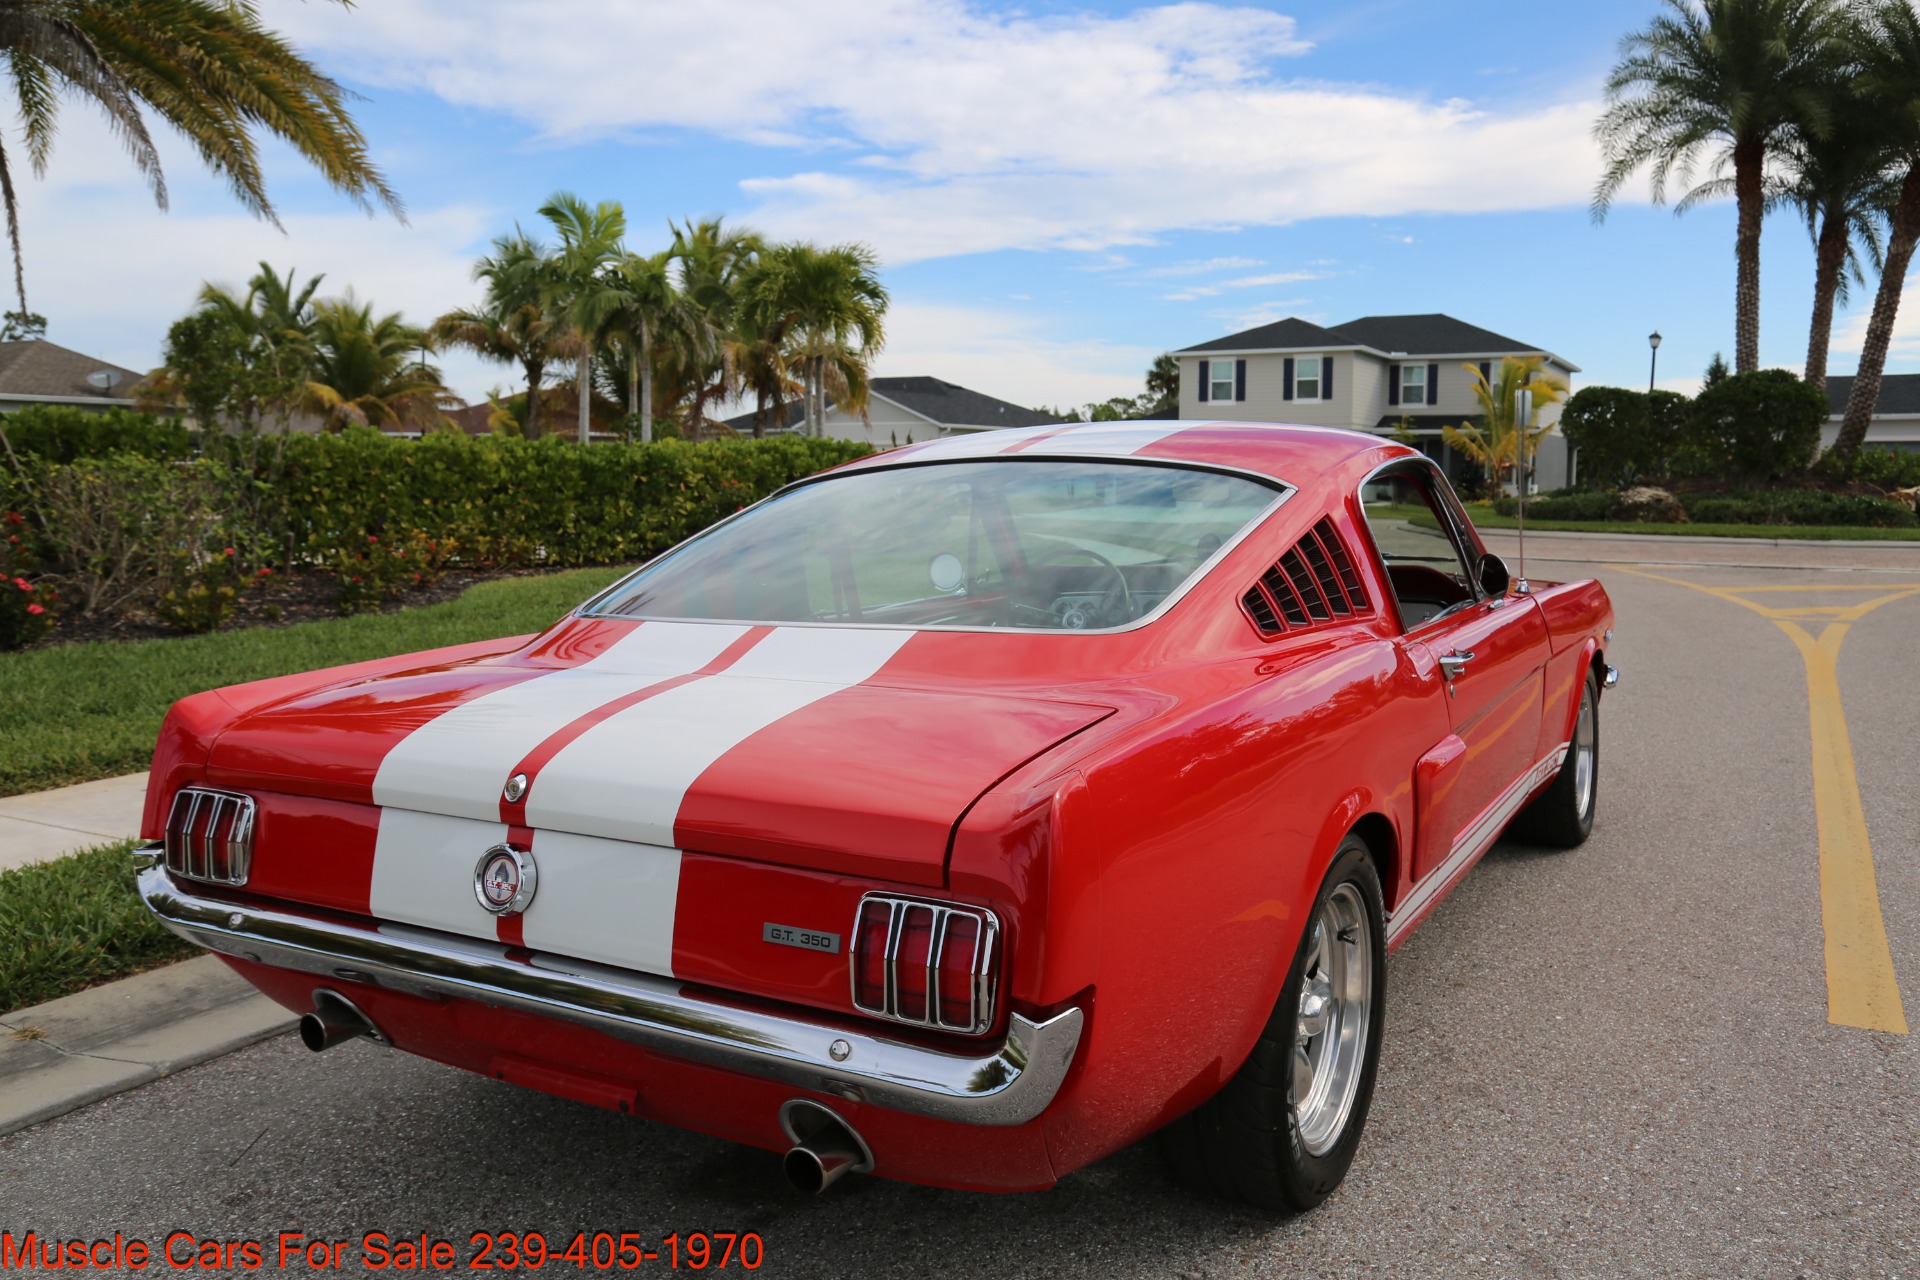 Used 1965 Ford Mustang Fastback A Code GT For Sale ($39,500) | Muscle ...